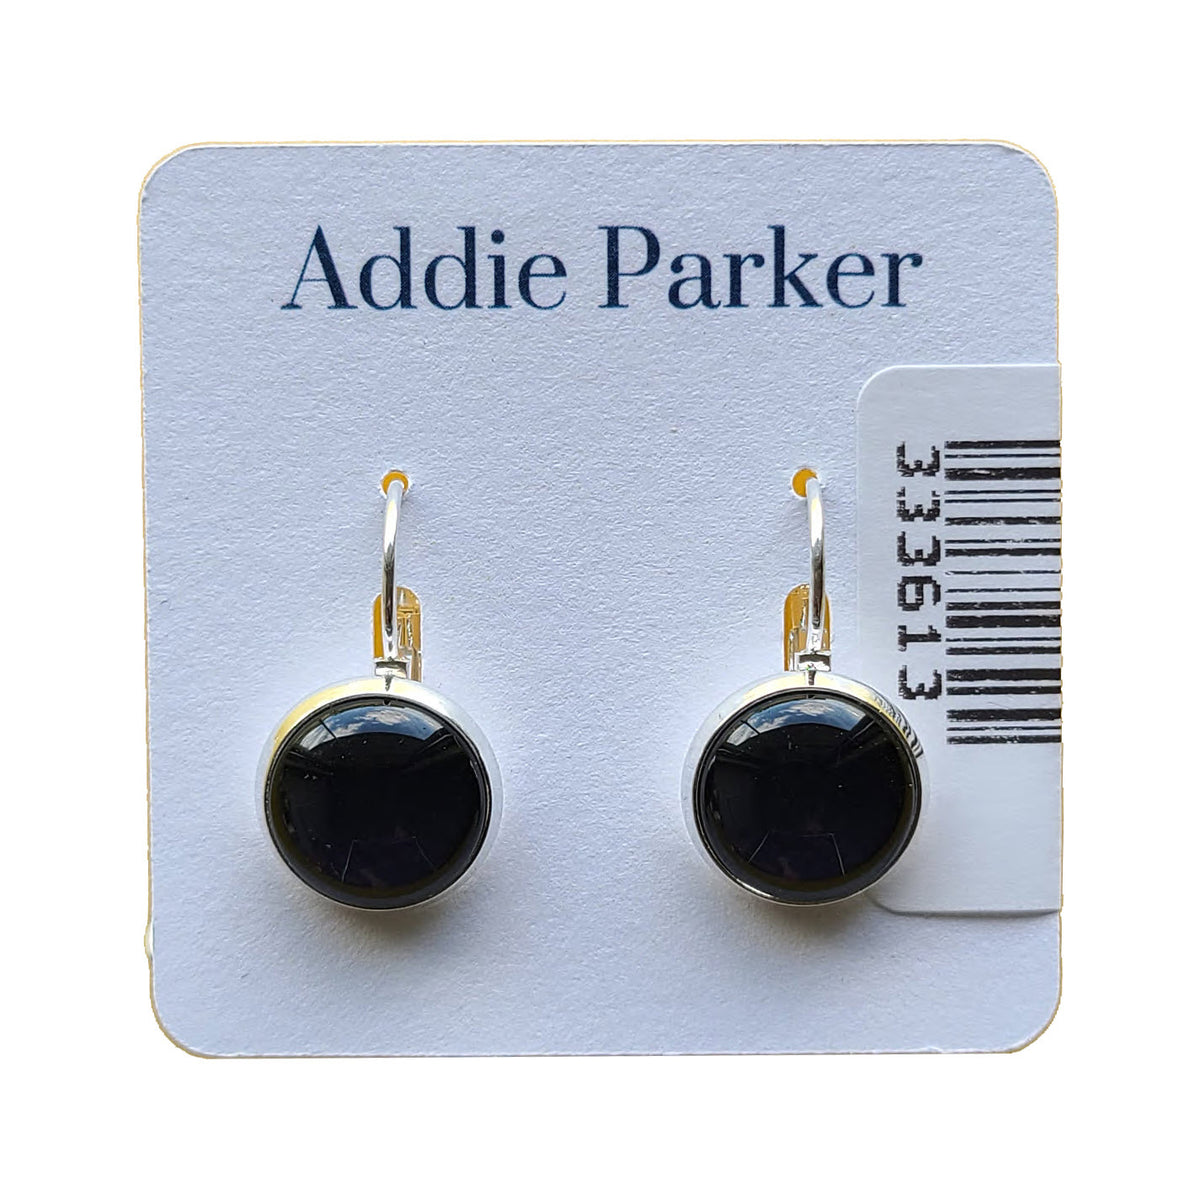 A pair of round black, nickel free Addie Parker earrings displayed on a white card with the name &quot;Addie Parker&quot; printed at the top.